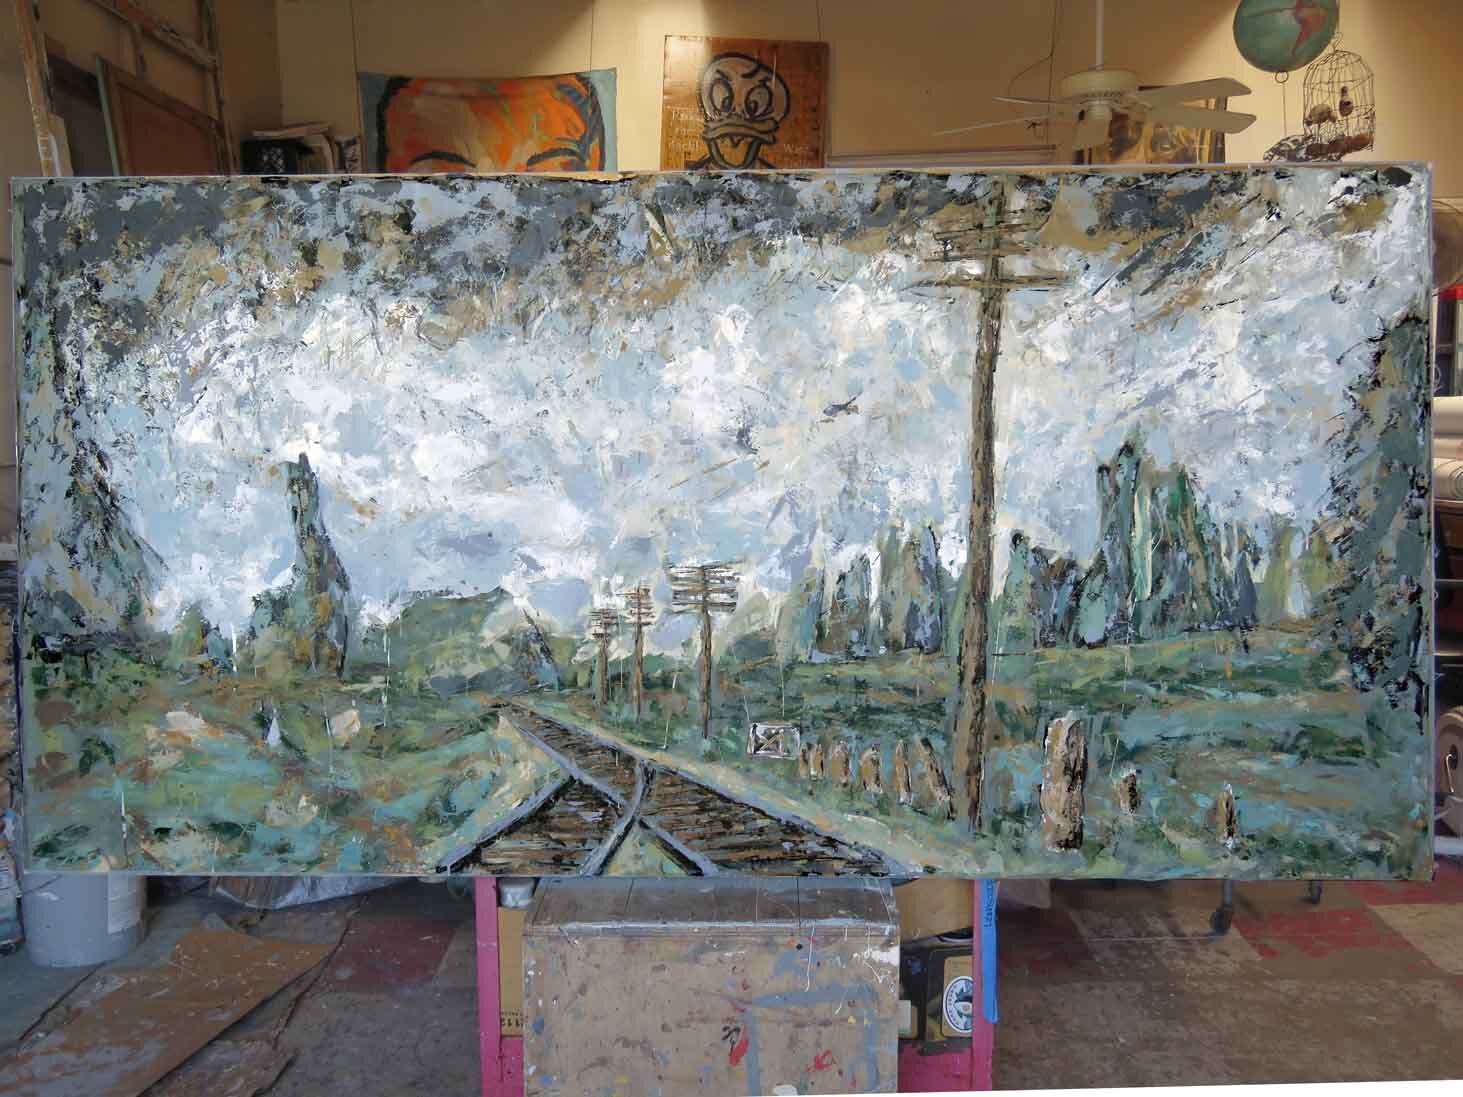 Railway 4 ft by 8 ft, acrylic on unstretched canvas